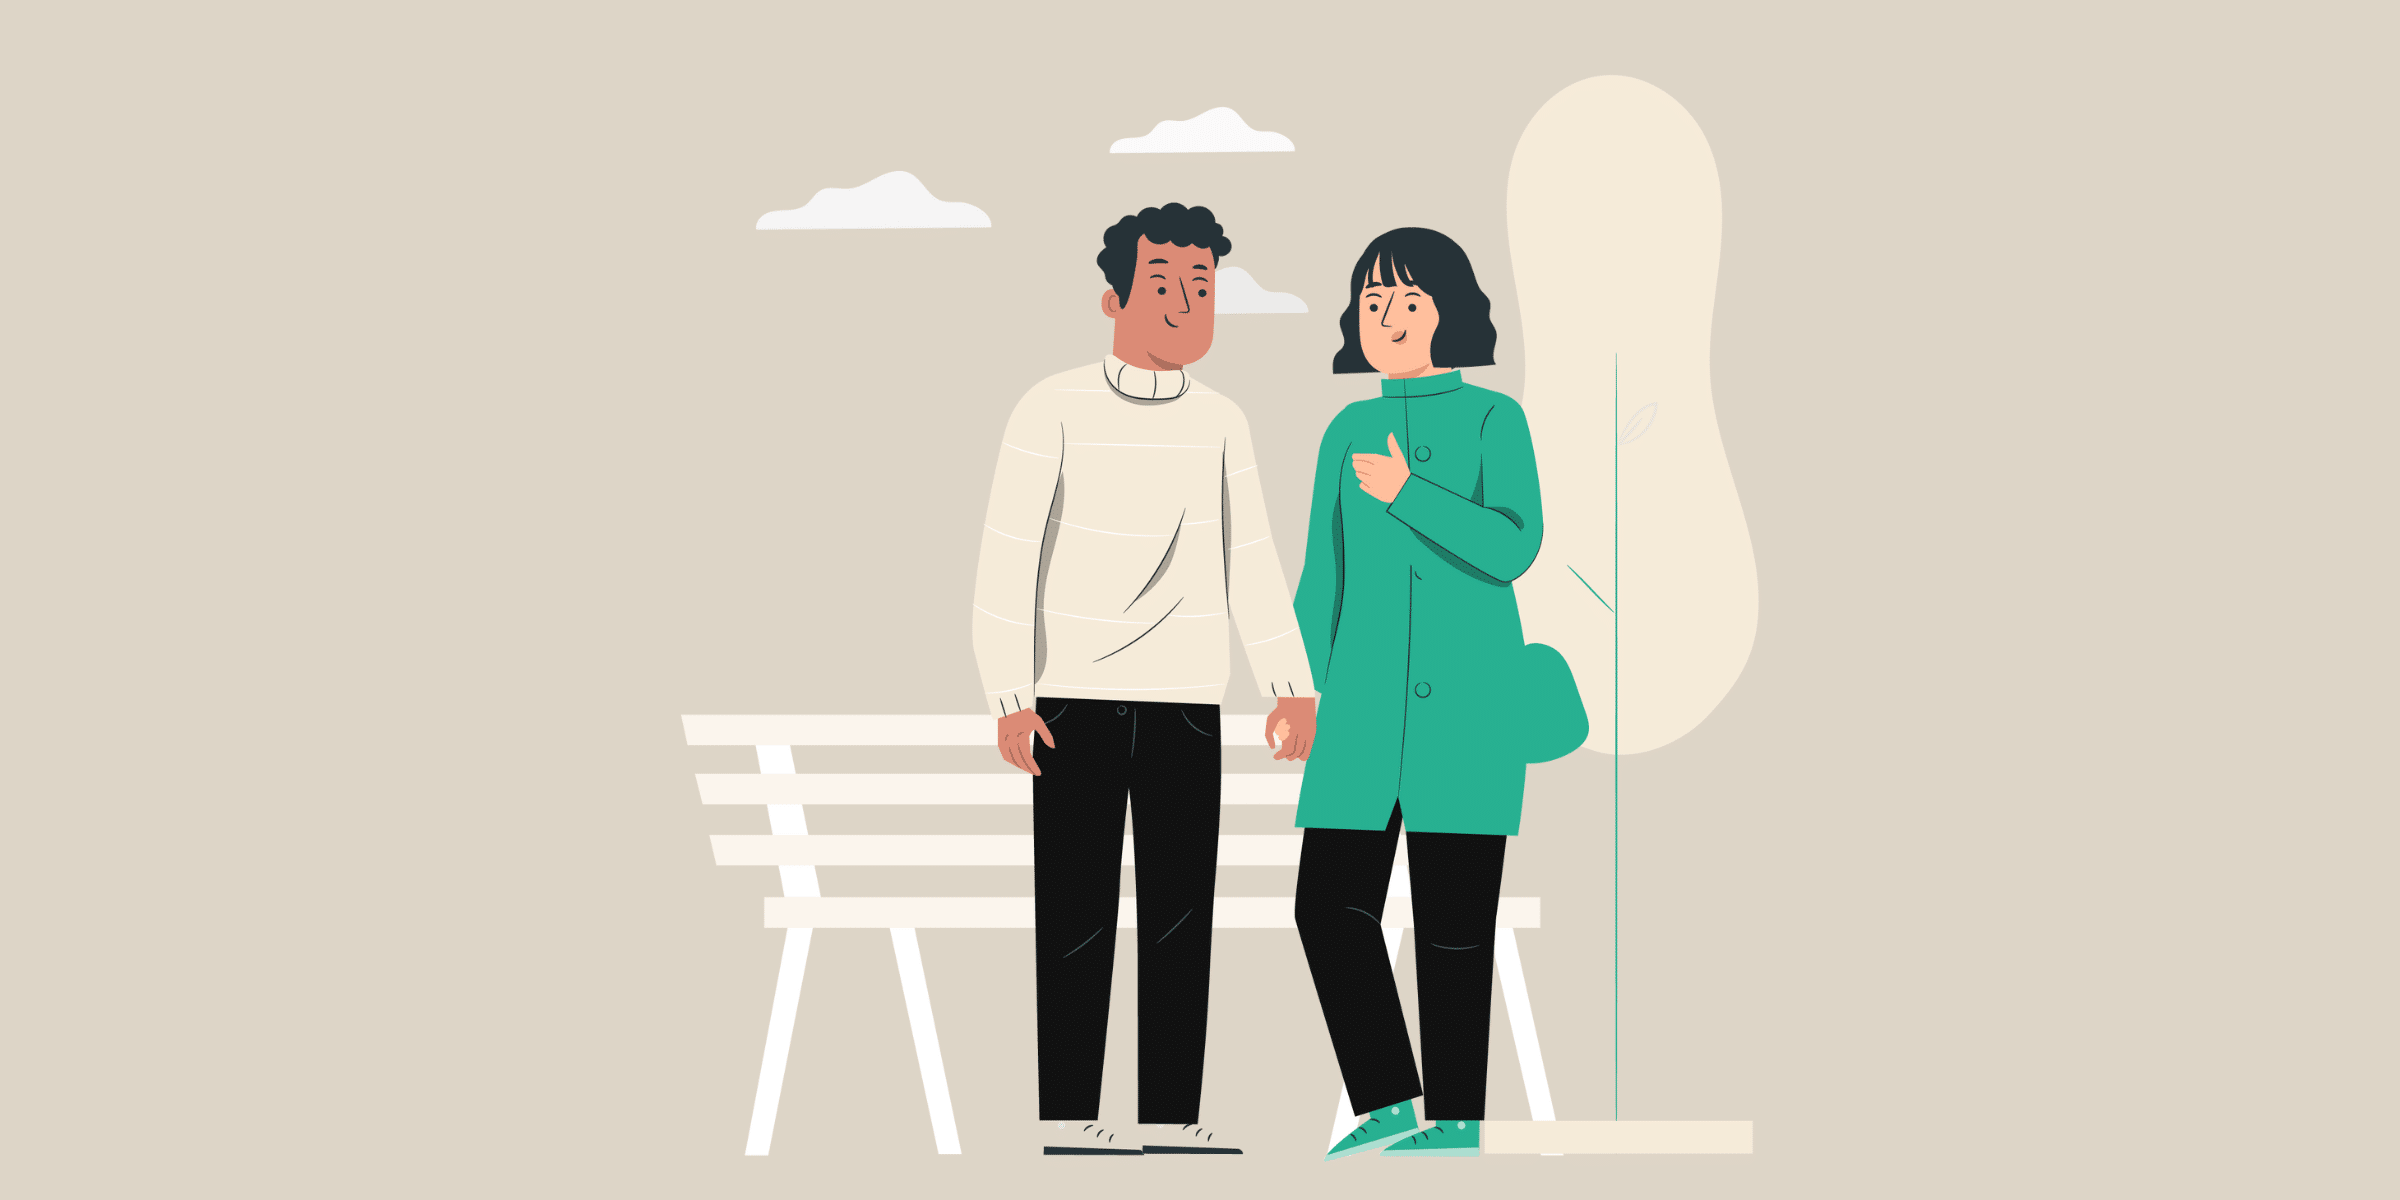 Can you find love over 40? Read our helpful guide that includes tips for dating in your 40s and beyond.